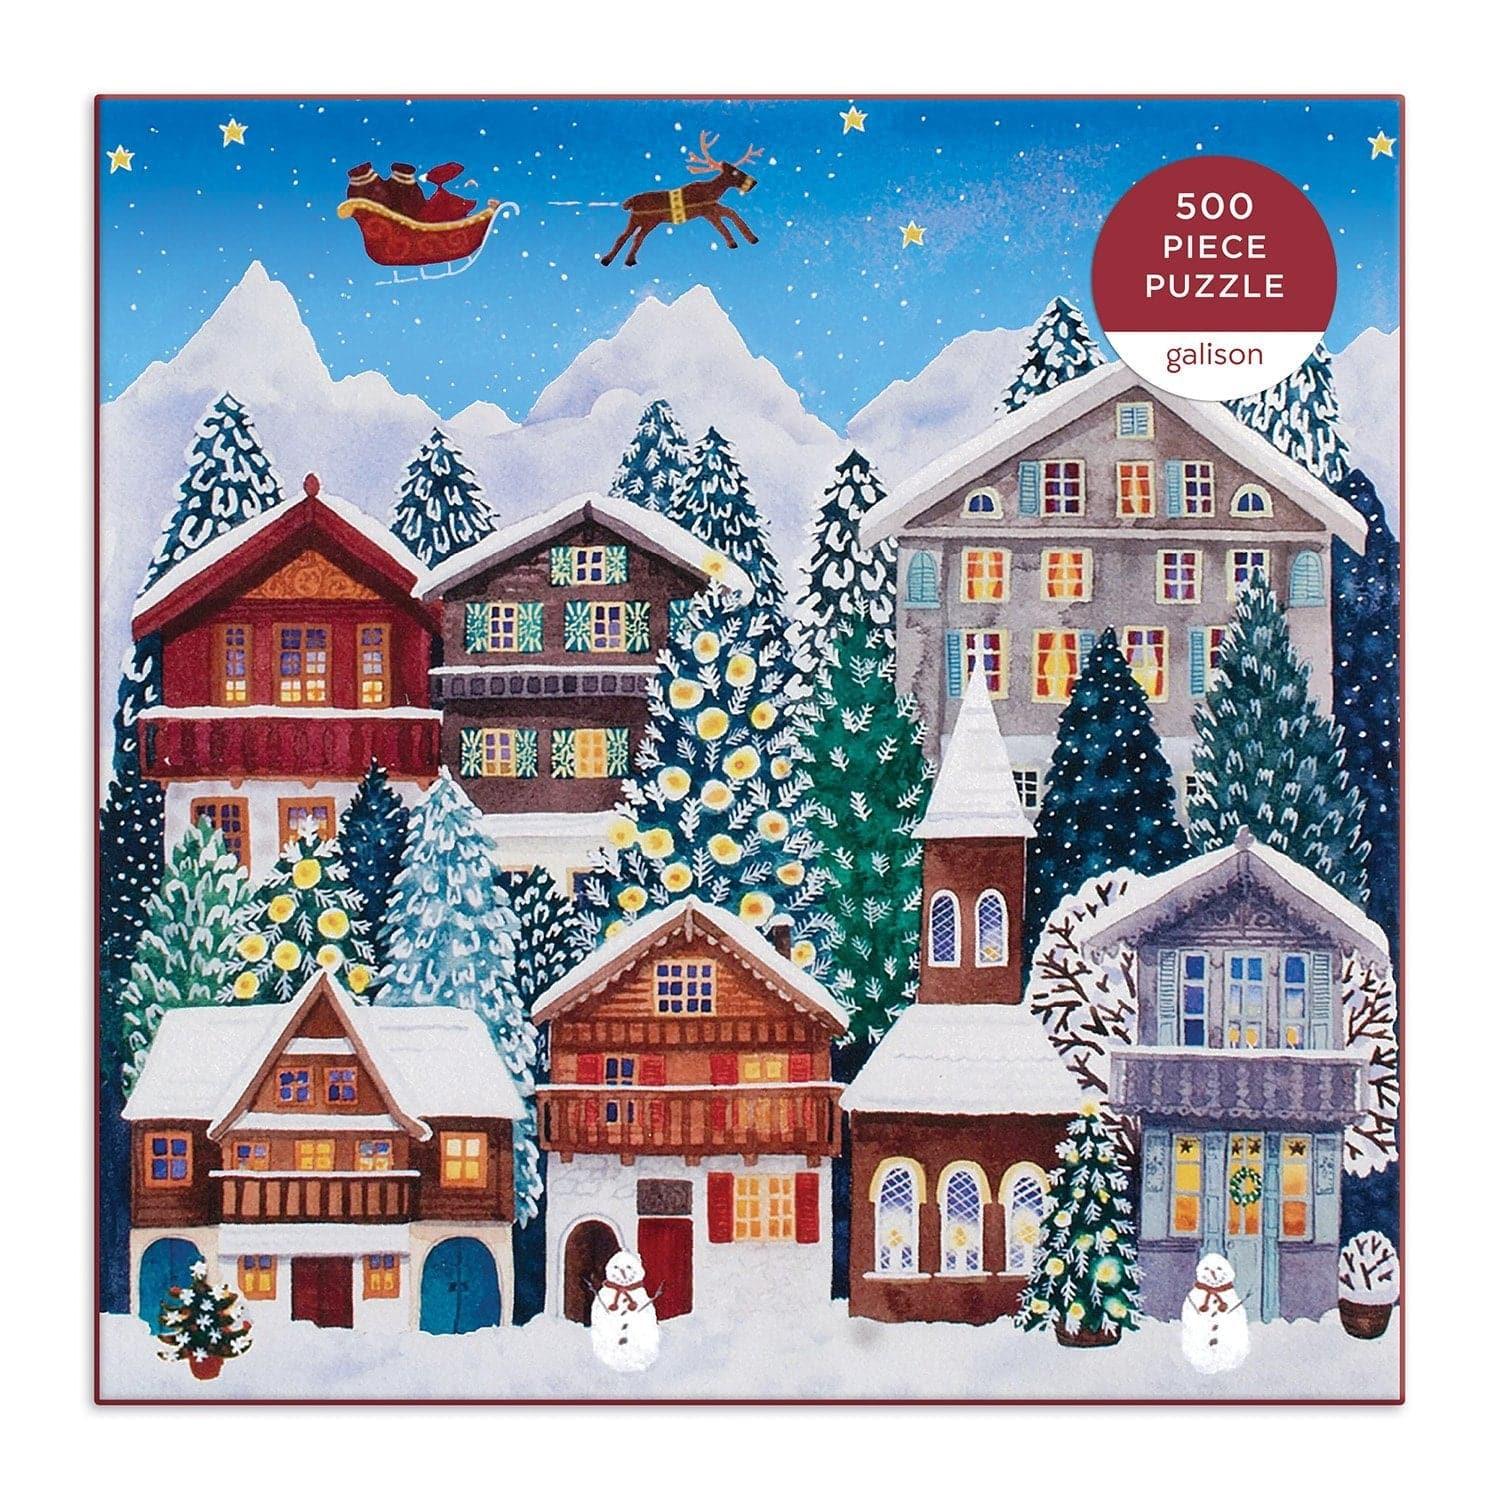 Yuletide Village 500 Piece Jigsaw Puzzle - MAIA HOMES